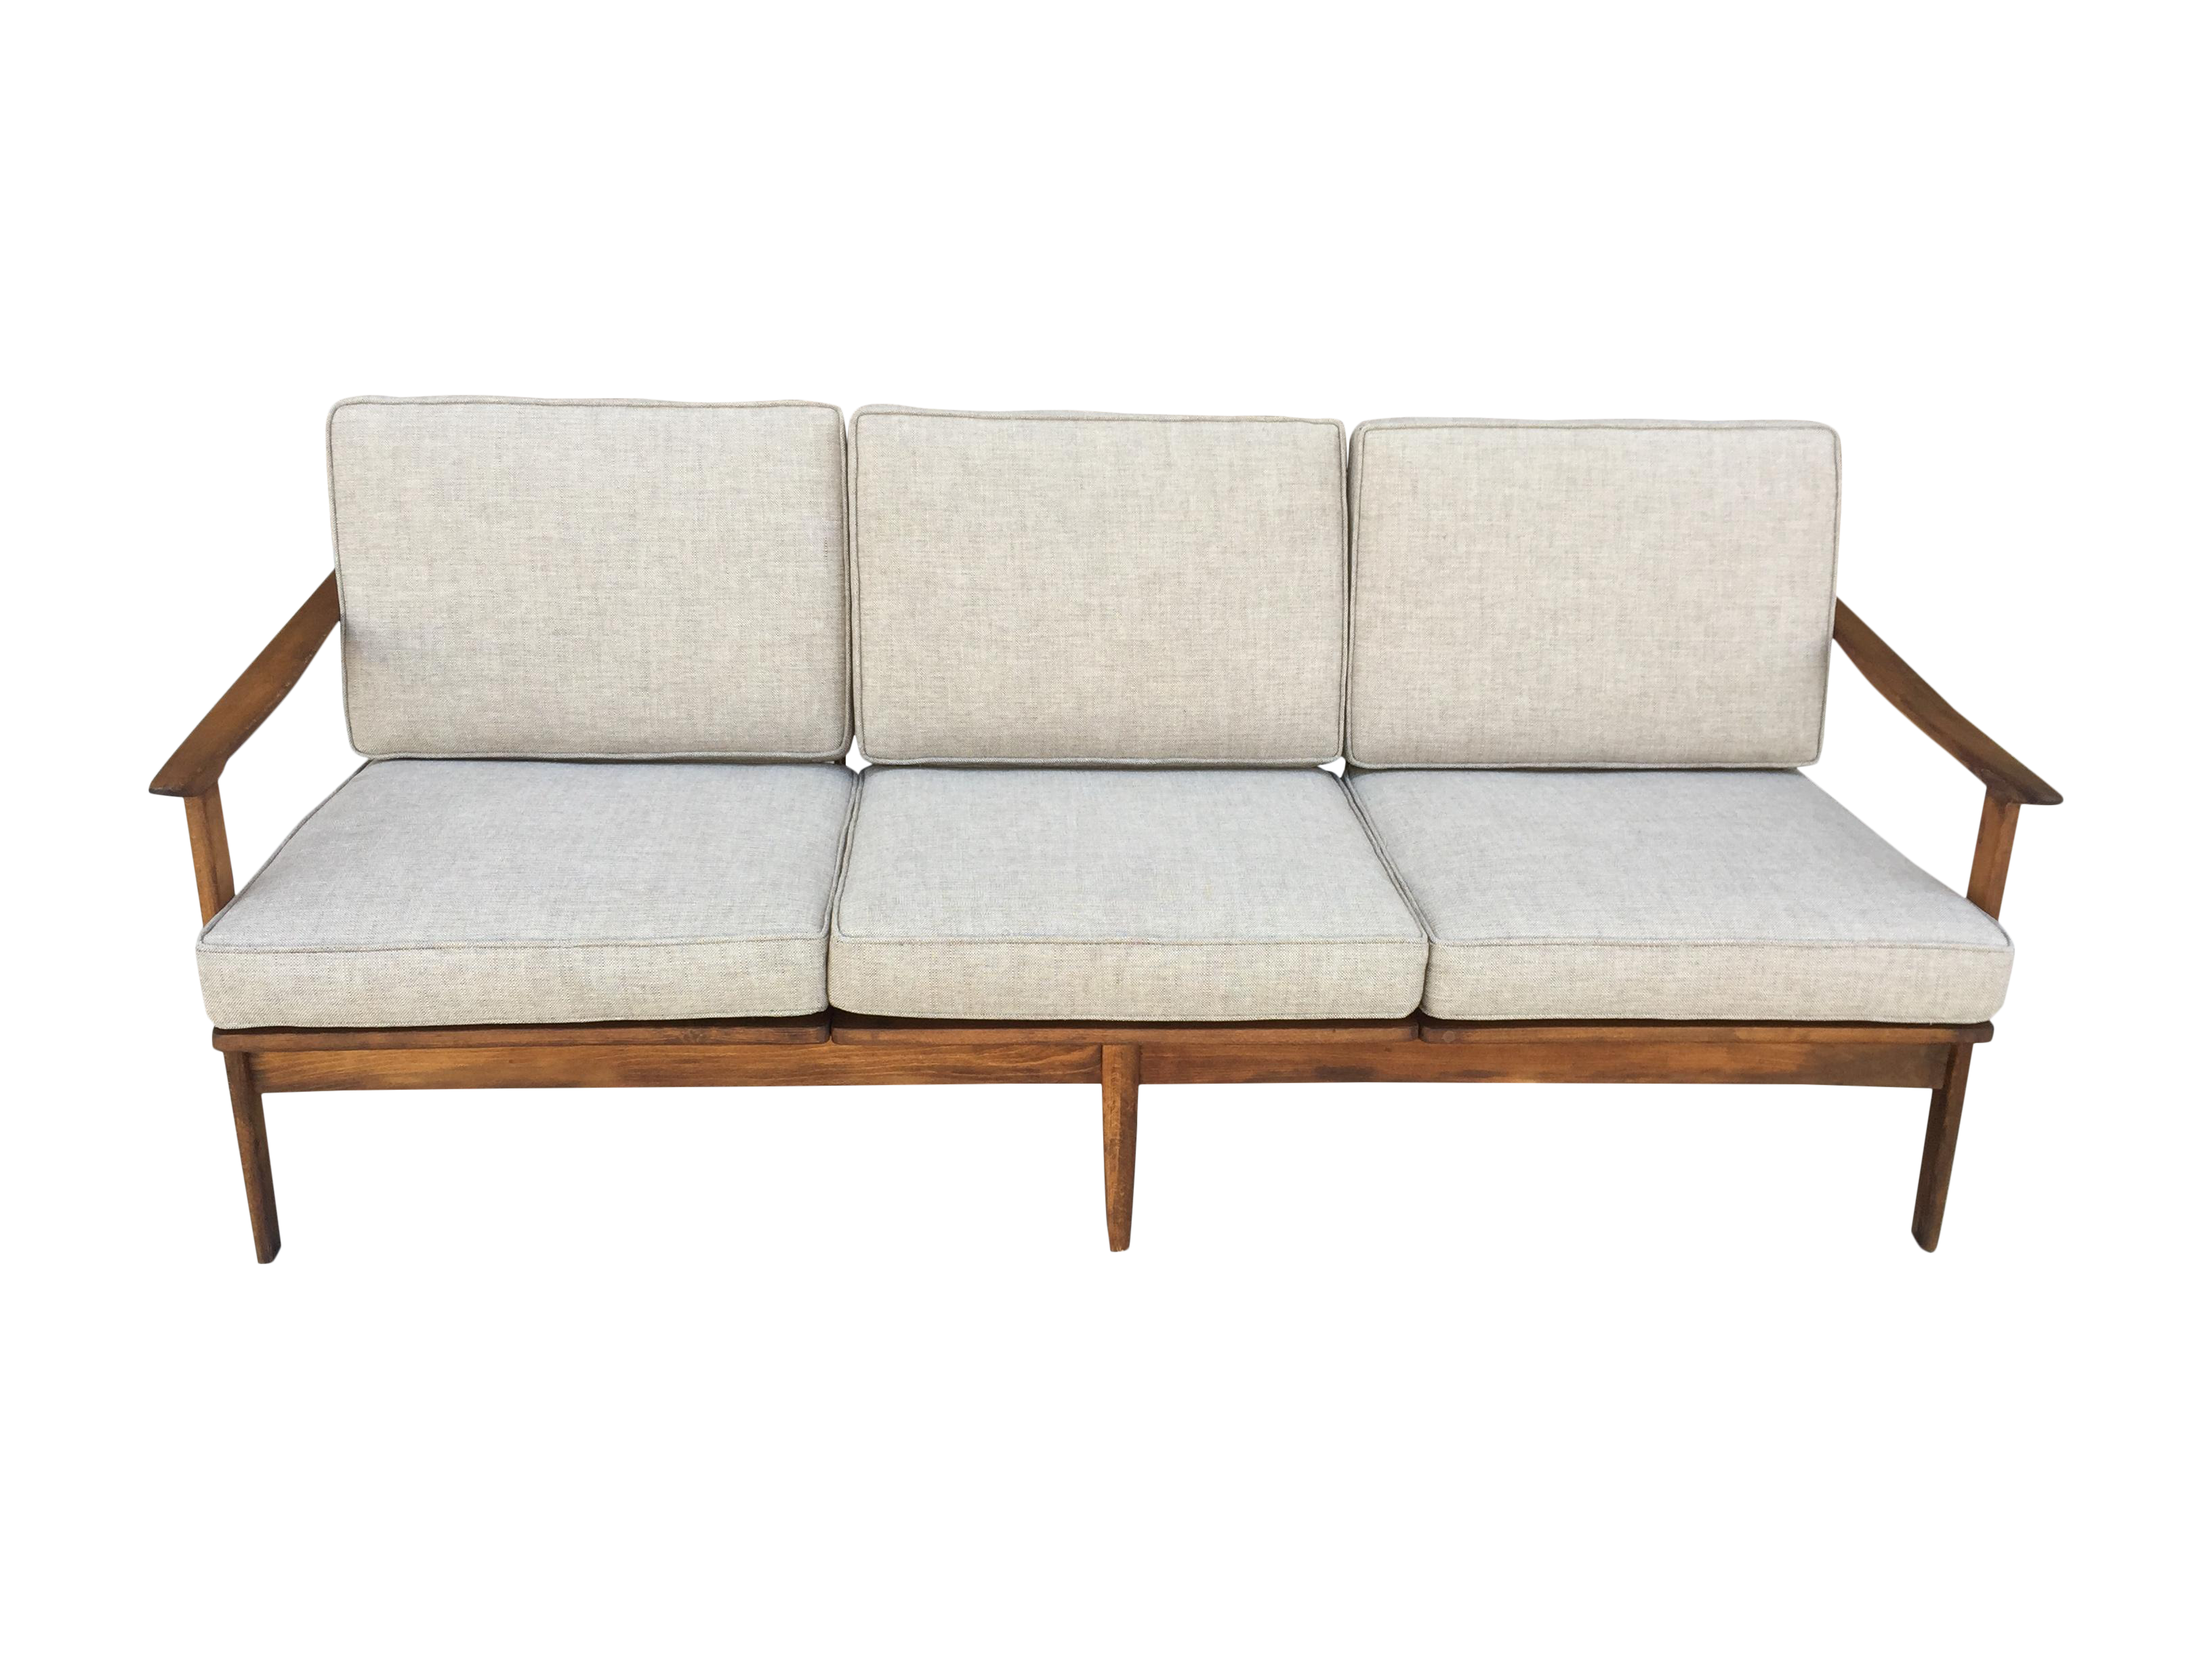 Mid Century Modern Three Seater Sofa On Chairish Outdoor Sofa Throughout Mid Century 3 Seat Couches (Gallery 8 of 20)